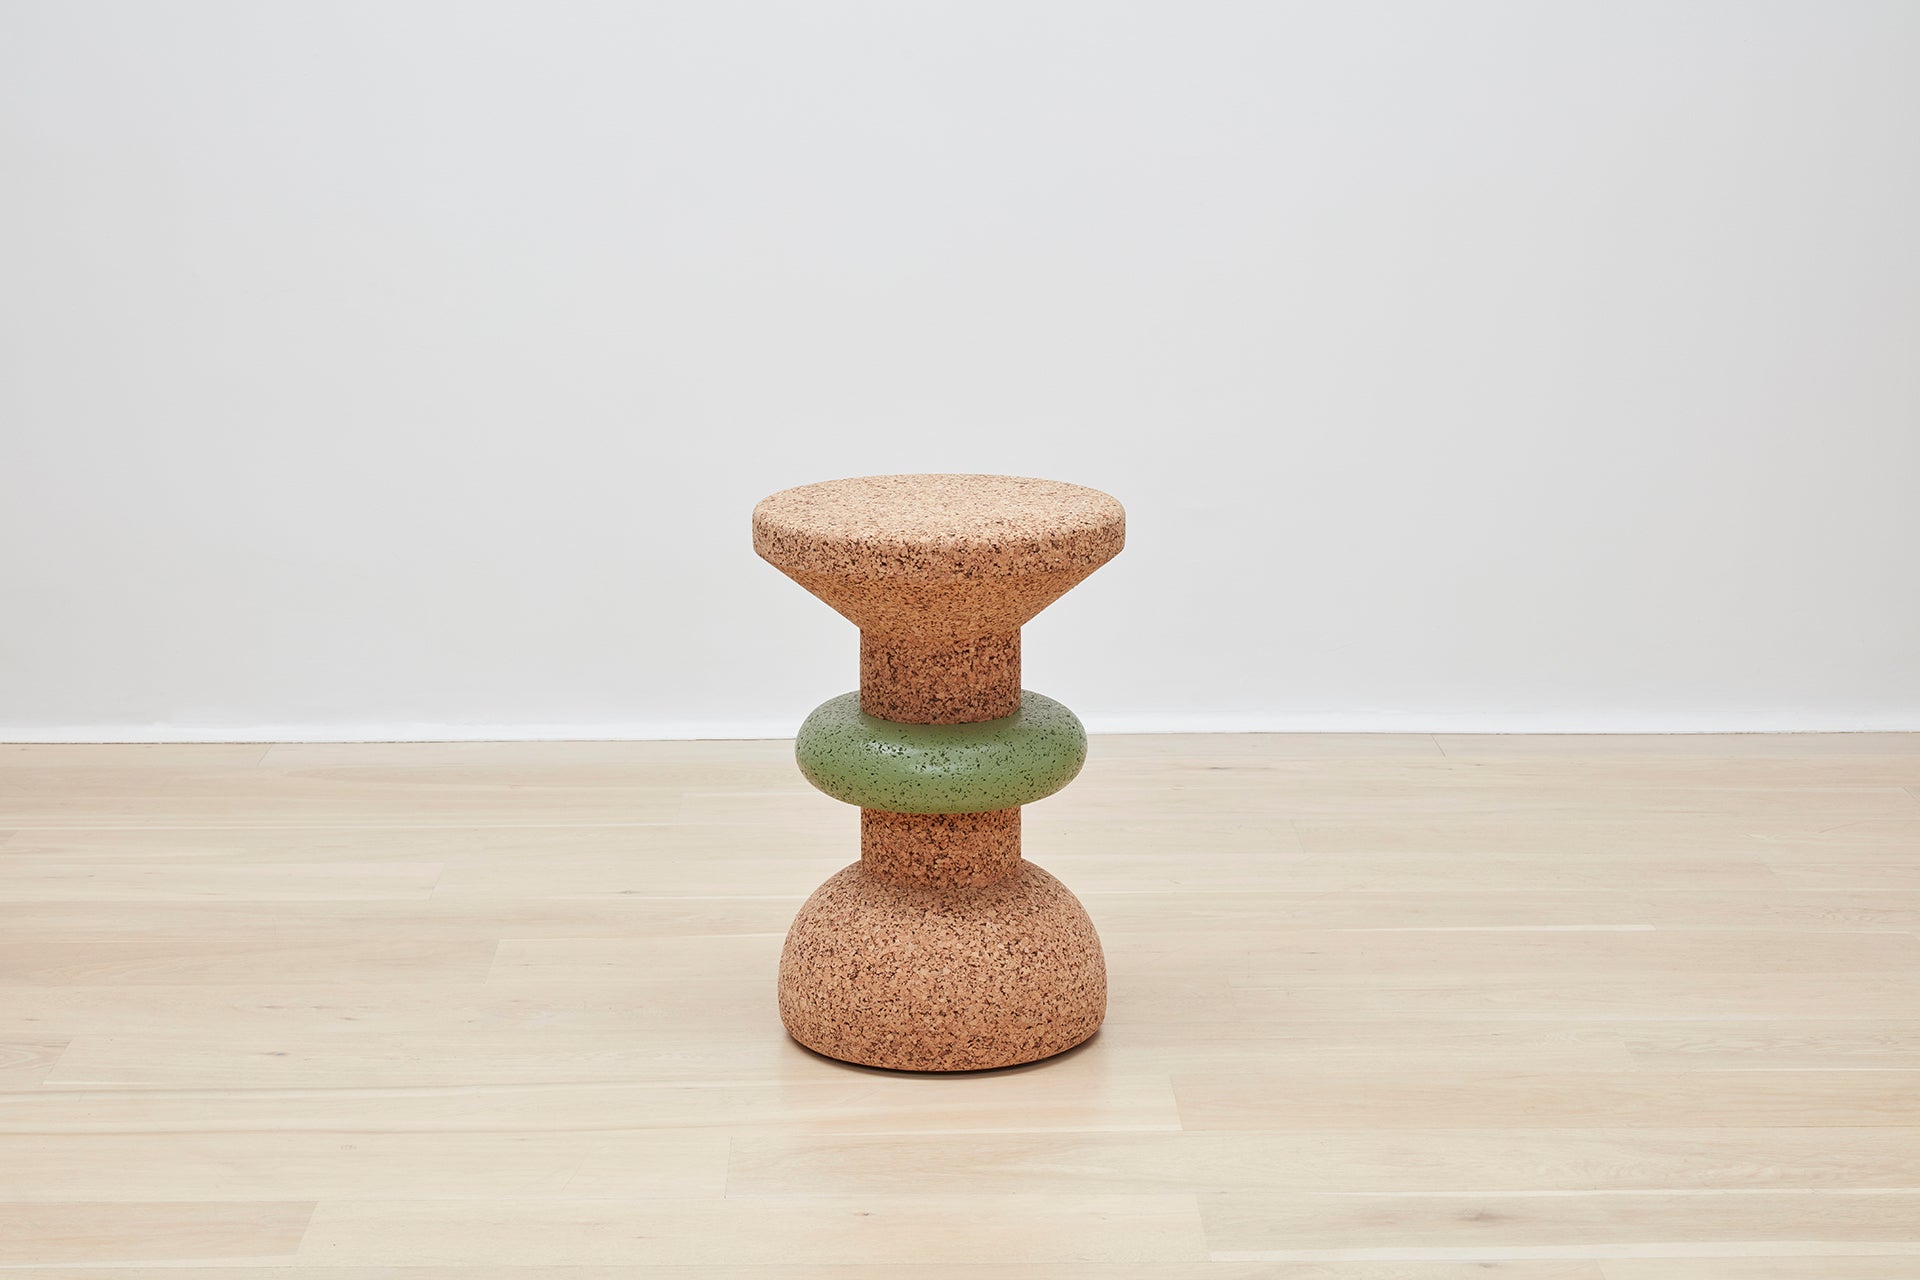 Showcase of Kanju's Wiid Green Banded Tall African Cork Side Table with a unique ringed design. This piece combines the natural texture of cork with a distinctive green band, creating a stylish and sustainable addition to any interior space. Perfect for those who appreciate eco-friendly luxury and innovative, artisan-crafted furniture.